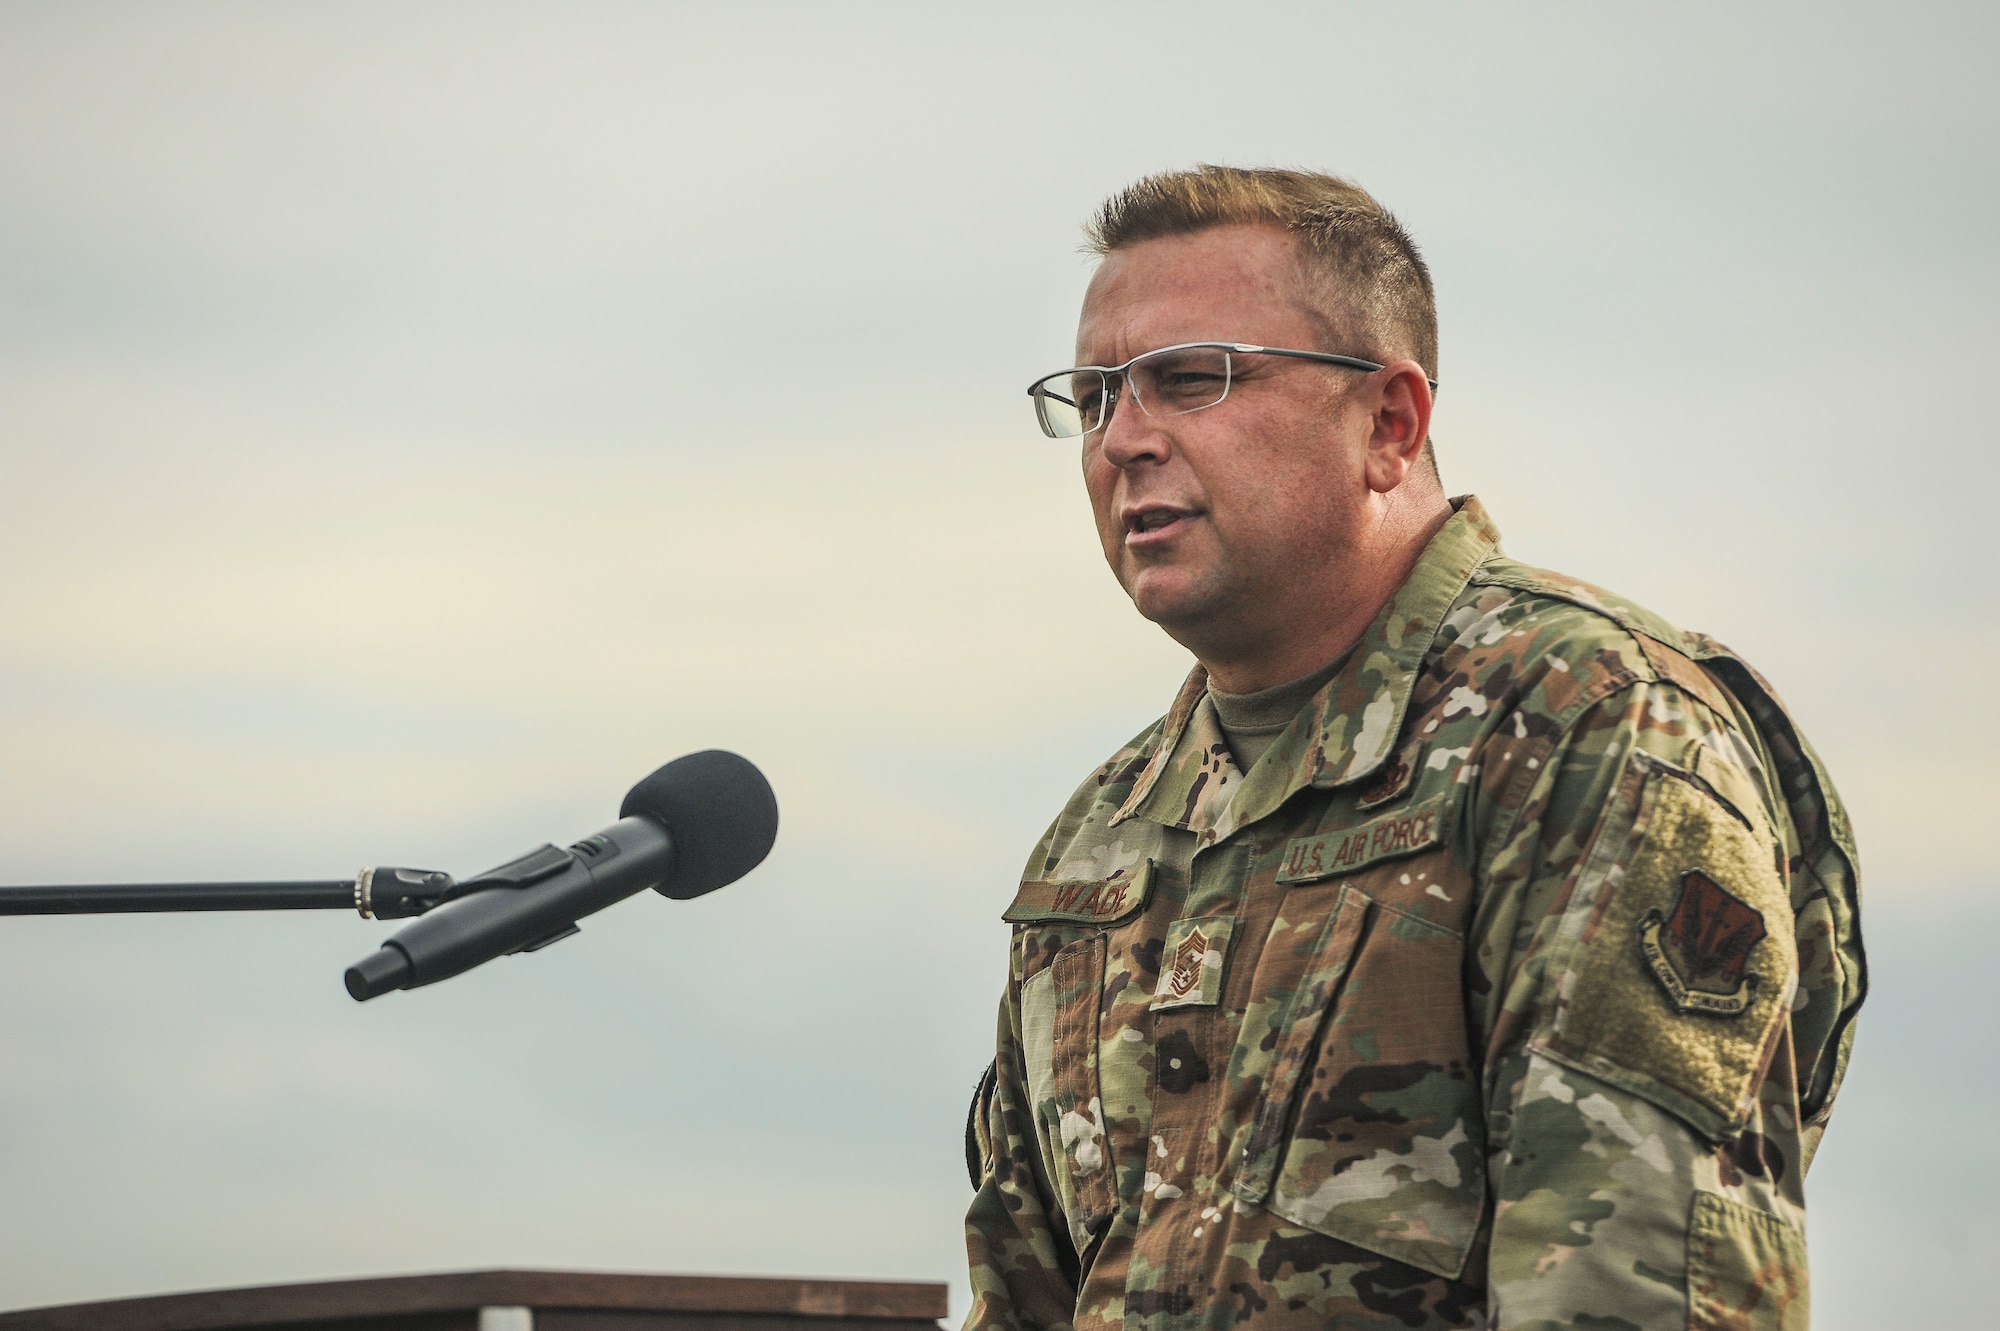 Chief Master Sgt. David Wade, command chief of Air Combat Command, shares his thoughts during an ACC quarterly award ceremony at Memorial Park on Joint Base Langley-Eustis, Virginia, Oct. 25, 2019. Prior to the ceremony, the commander of ACC also directed his staff members to get out of the office, move and connect as part of an effort to improve morale and sharpen resilience. (U.S. Air Force photo by Tech. Sgt. Nick Wilson)